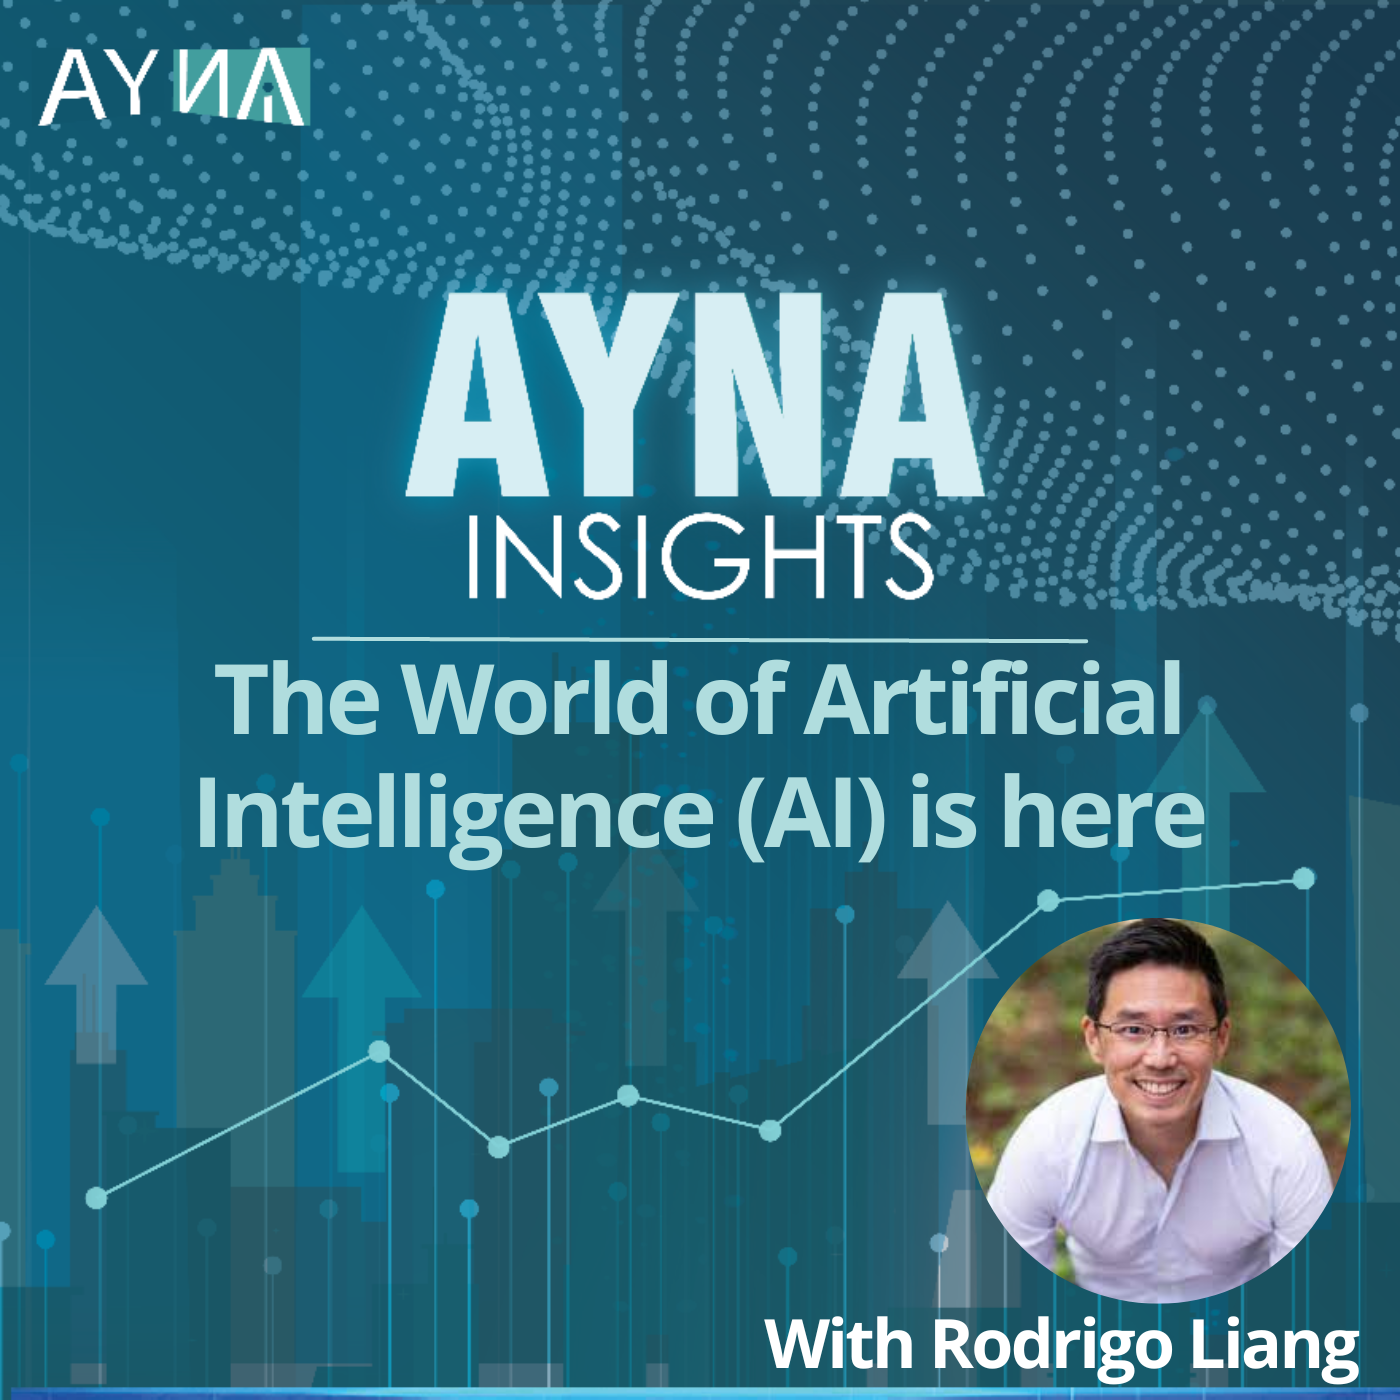 Rodrigo Liang: The World of Artificial Intelligence (AI) is here